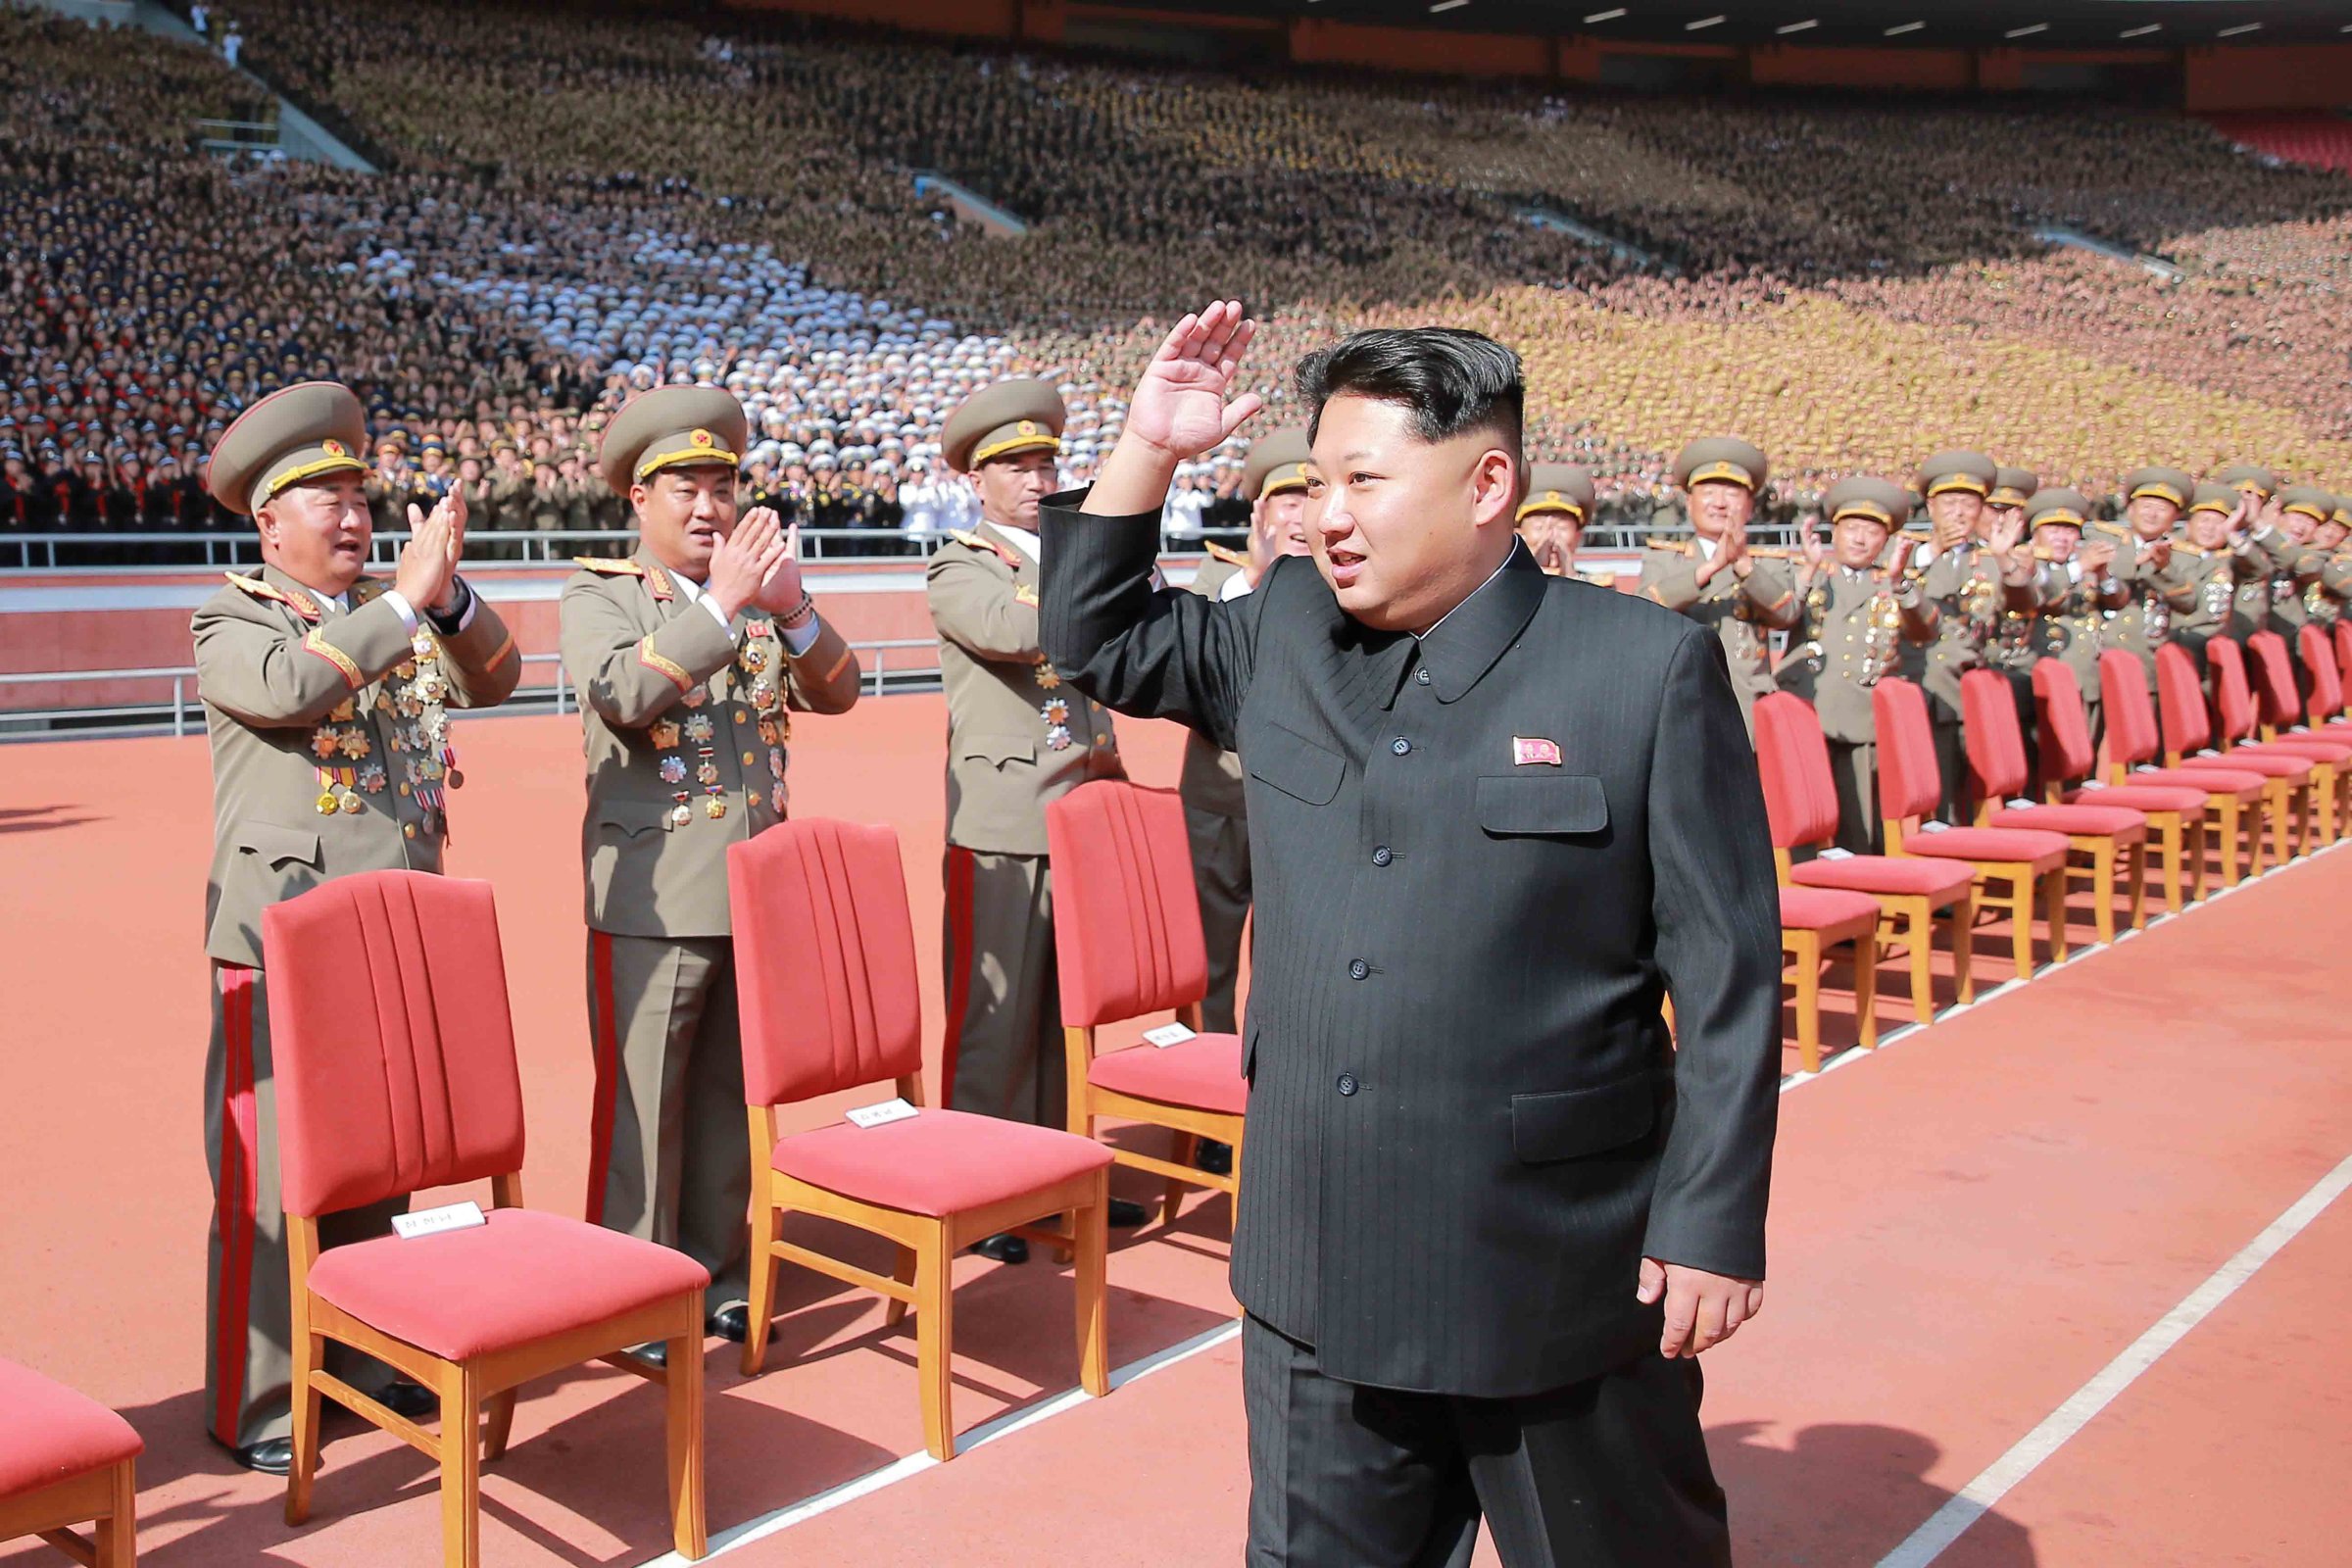 PYONGYANG, Oct. 14, 2015 -- Photo provided by Korean Central News Agency on Oct. 14, 2015 shows top leader of the Democratic People's Republic of Korea Kim Jong Un recently having a photo session with the participants in the military parade celebrating the 70th anniversary of the ruling Workers' Party of Korea in Pyongyang, capital of the Democratic People's Republic of Korea. (Xinhua/KCNA)